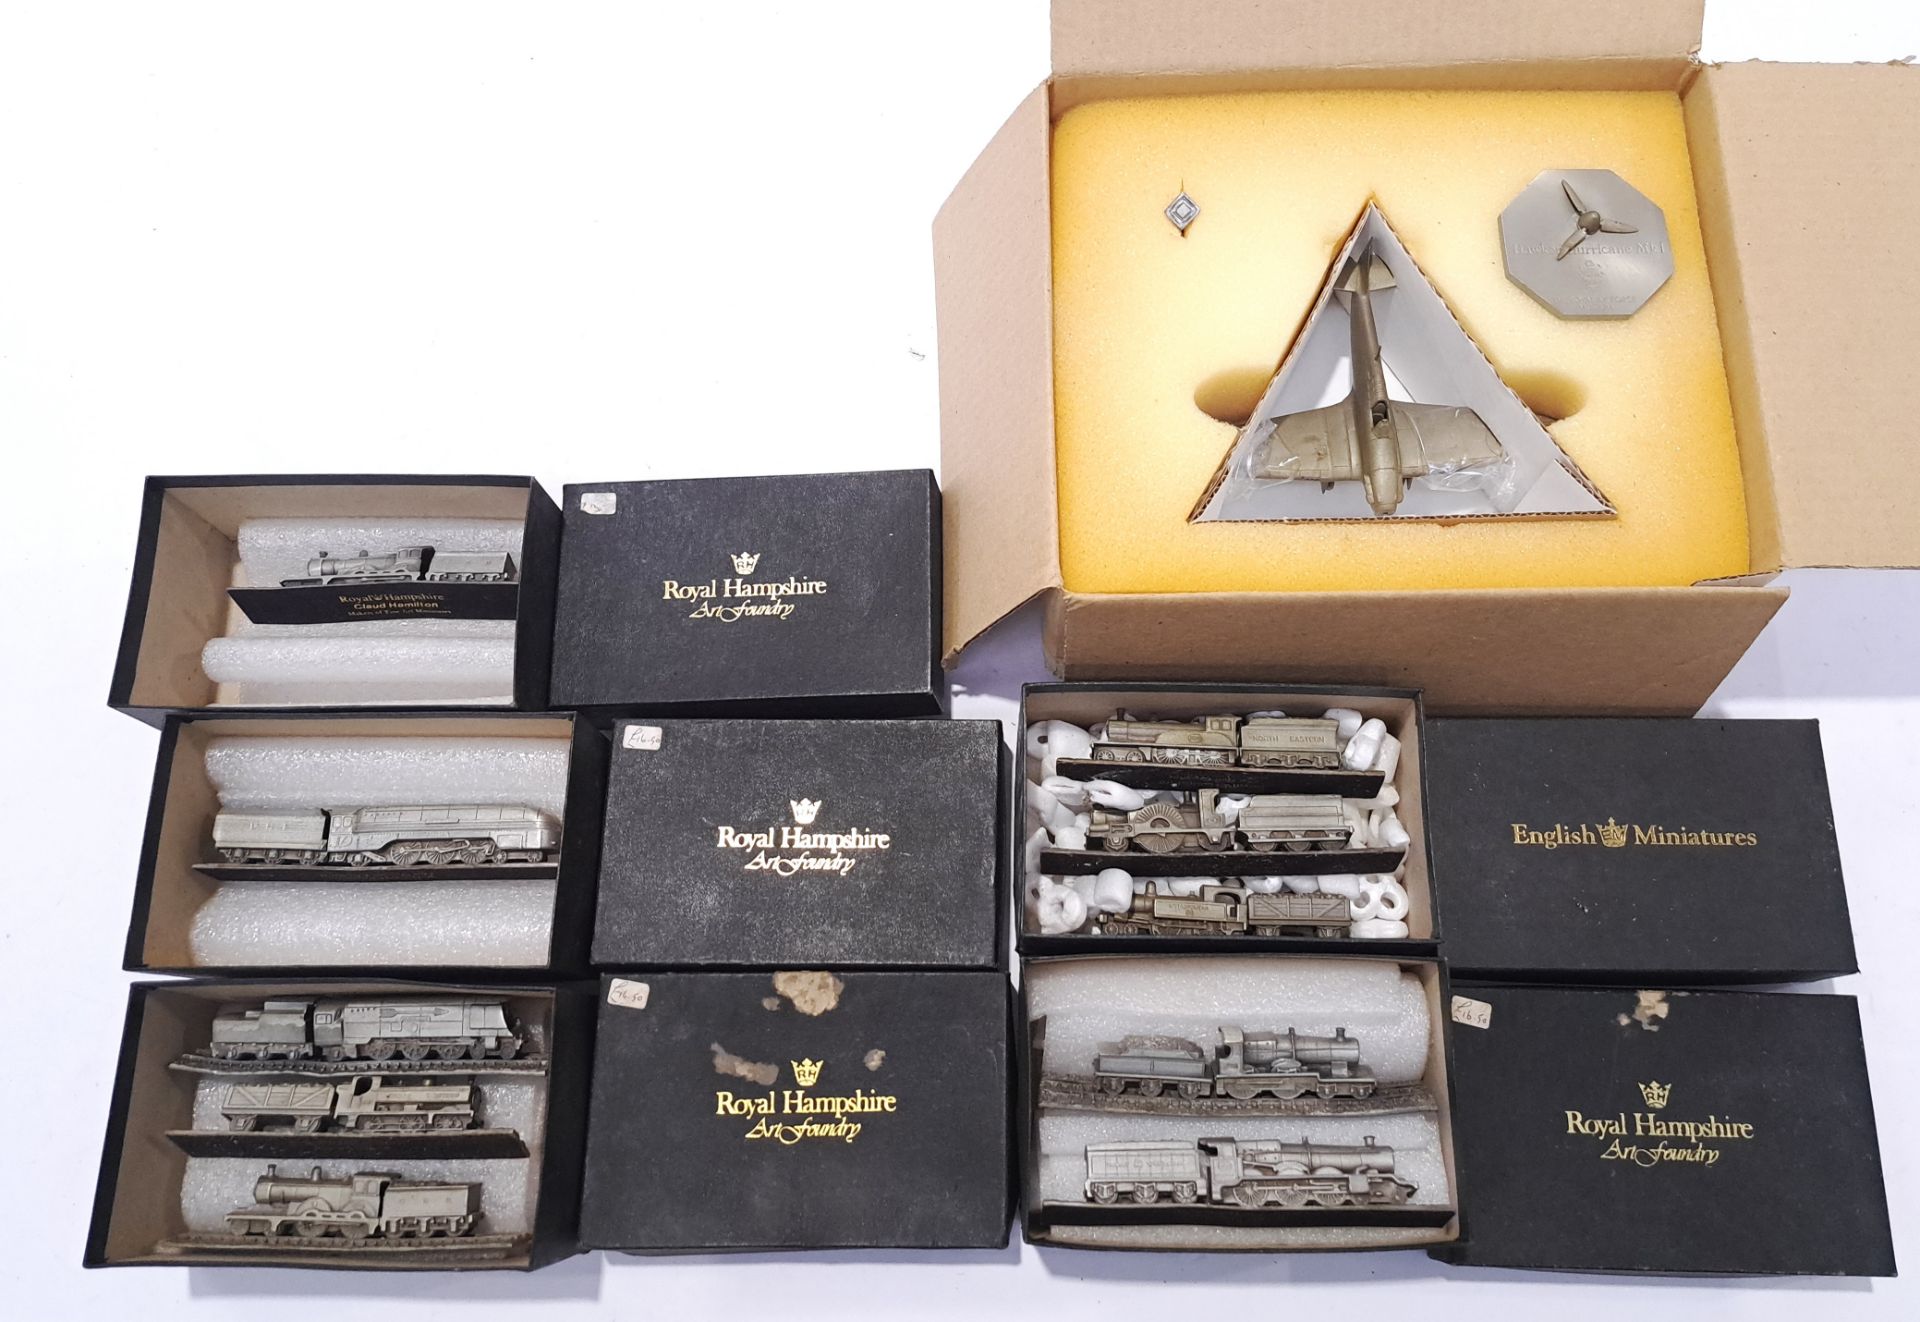 Pewter, mixed group of Trains and an Airplane. Conditions generally appear Good to Near Mint in g...